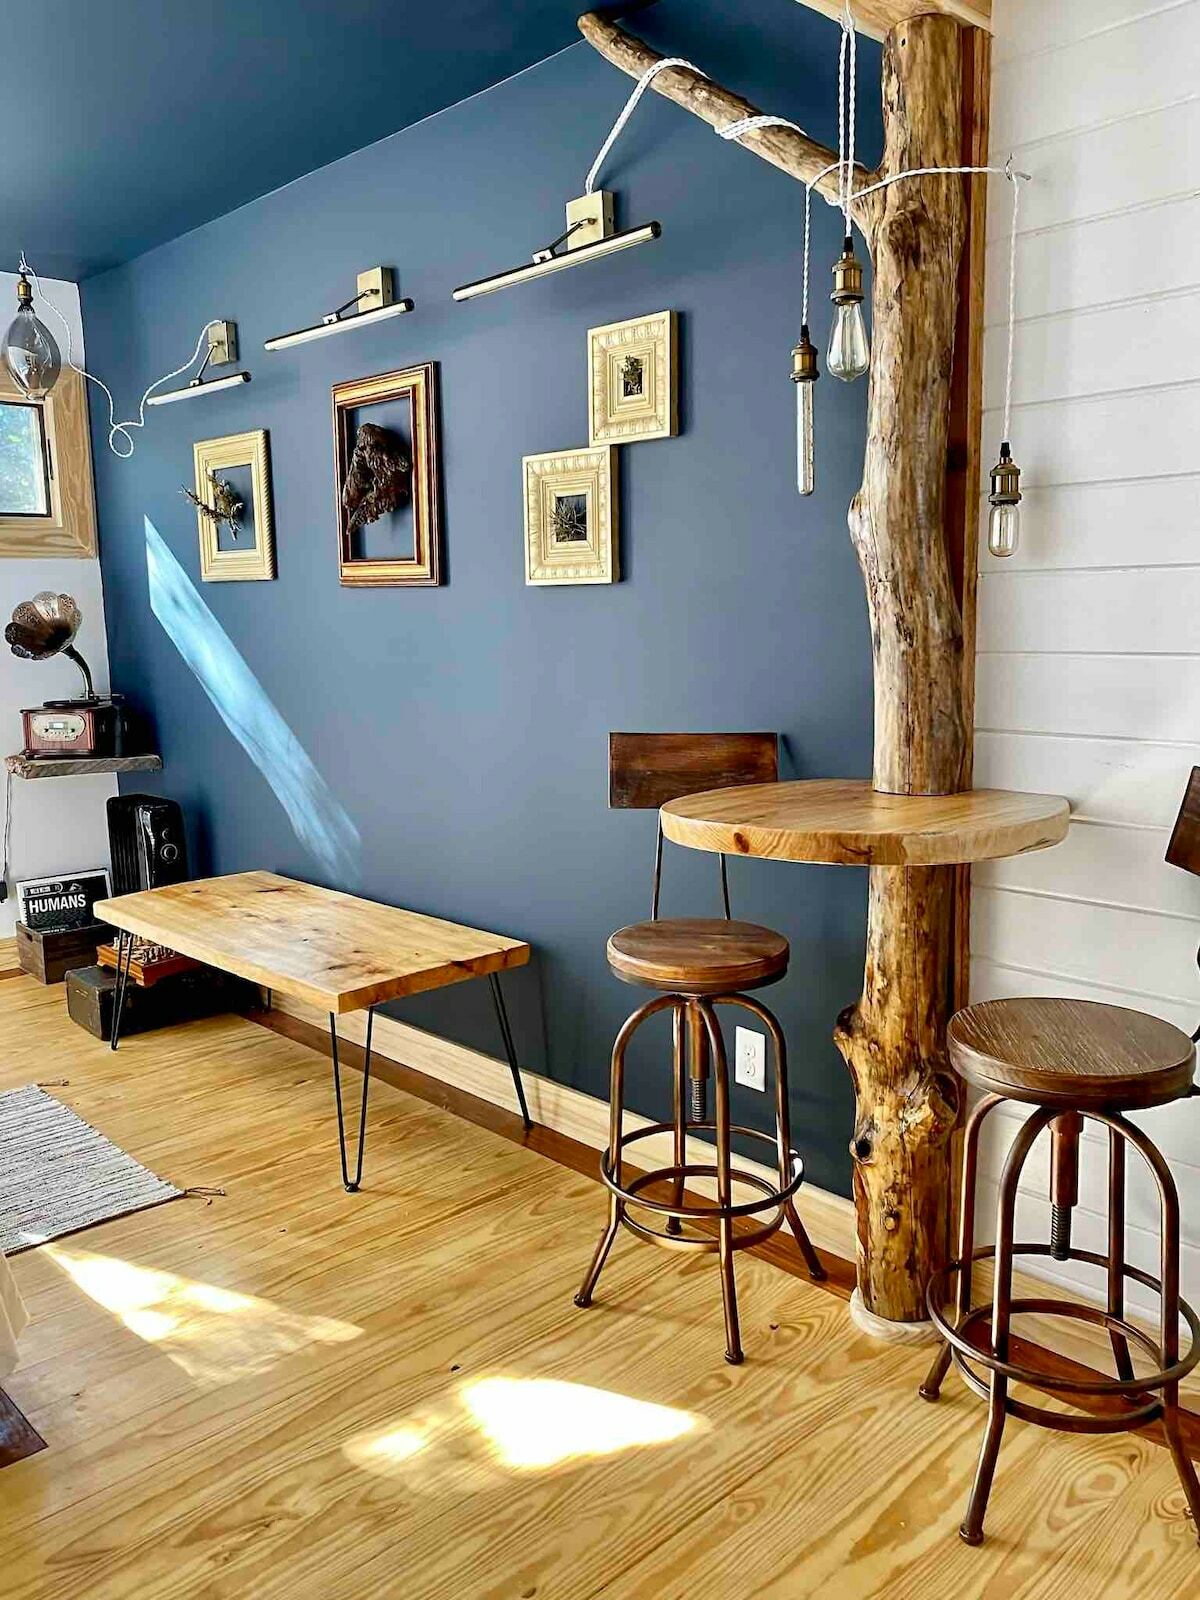 A living area with a debarked tree trunk post with an integrated natural wood slab small bar-style mini tabletop